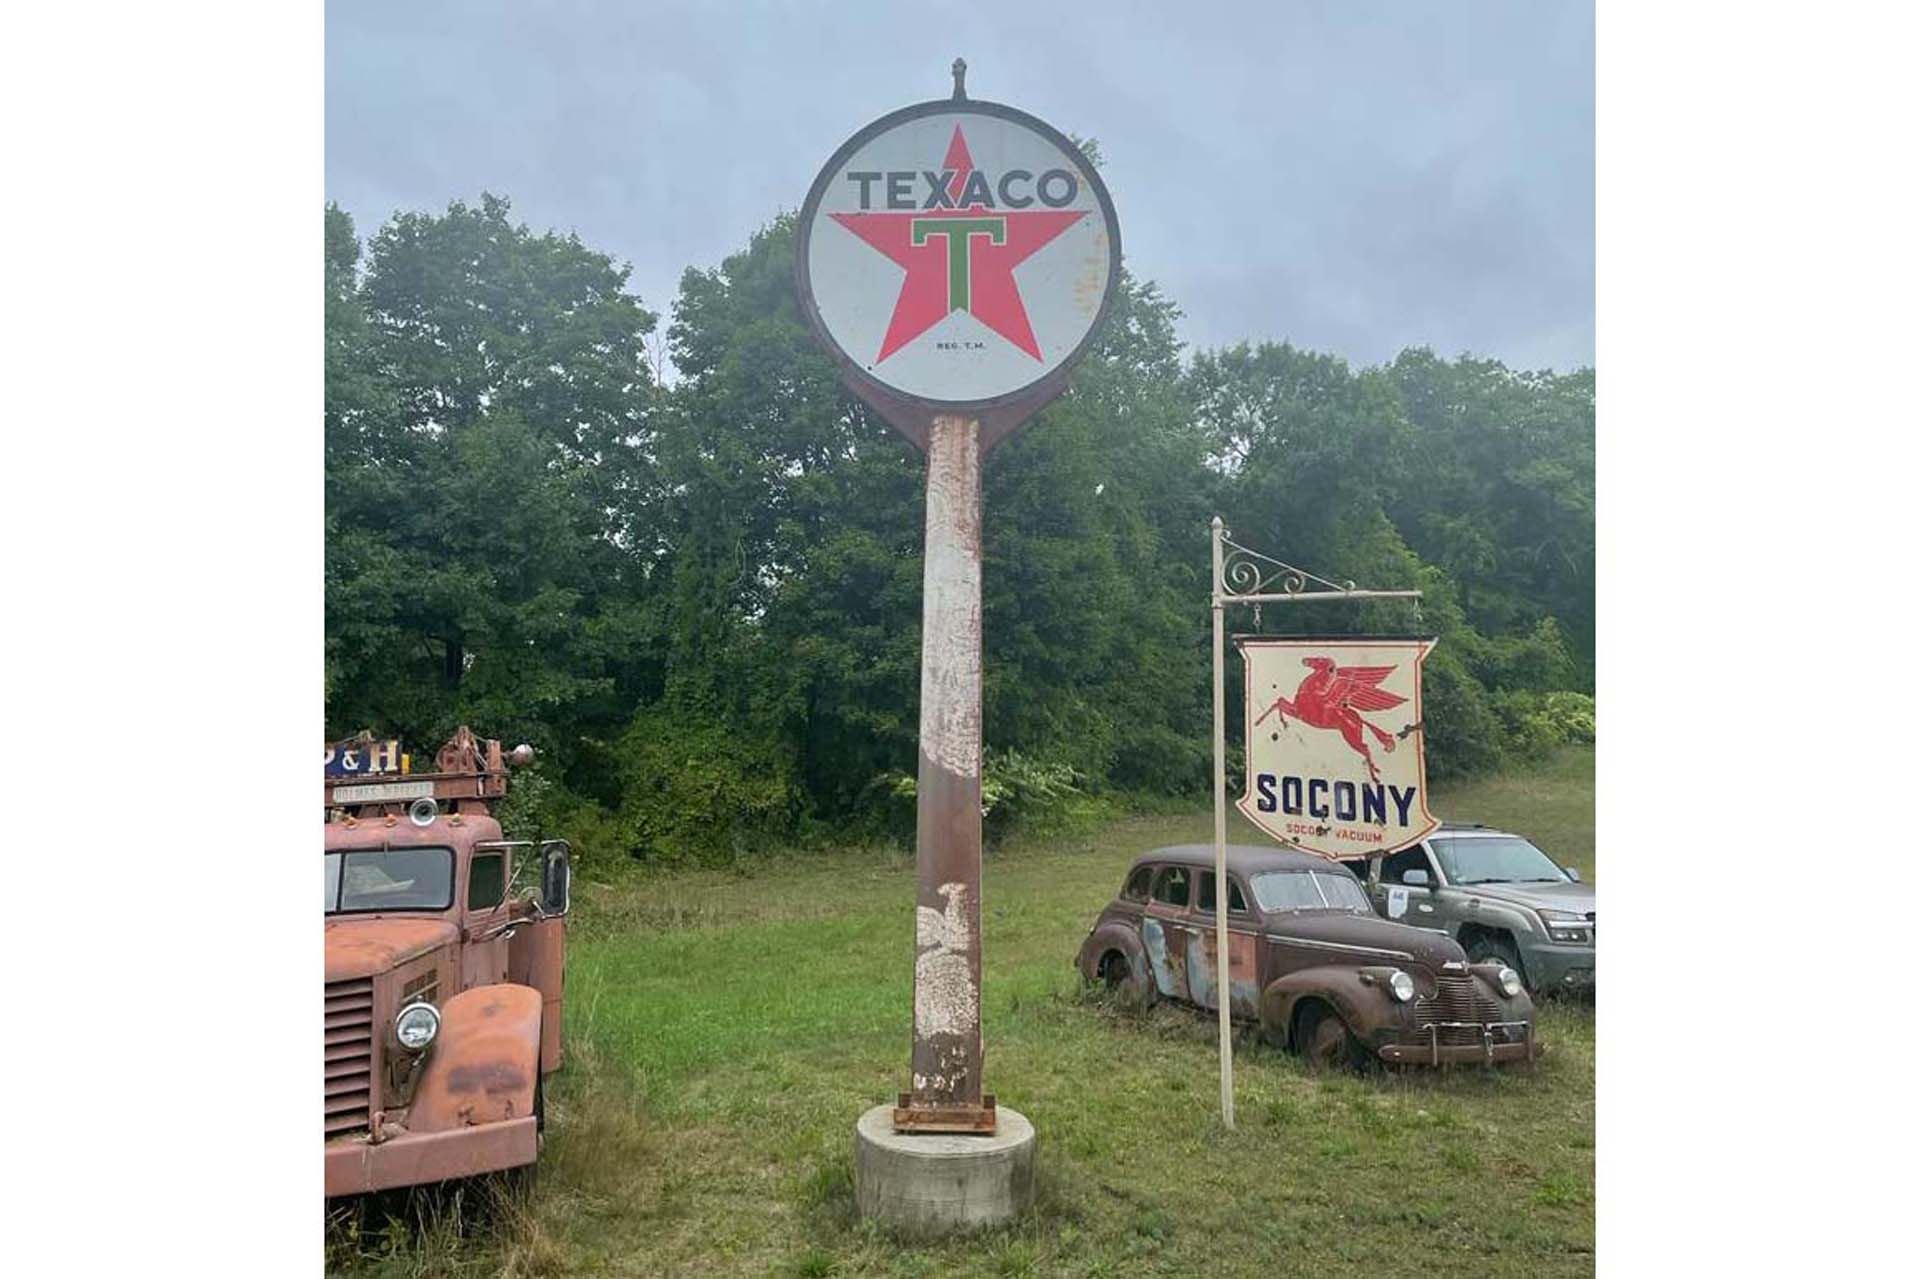 For Sale Very Large Texaco Service Station Double-Sided Porcelain Sign